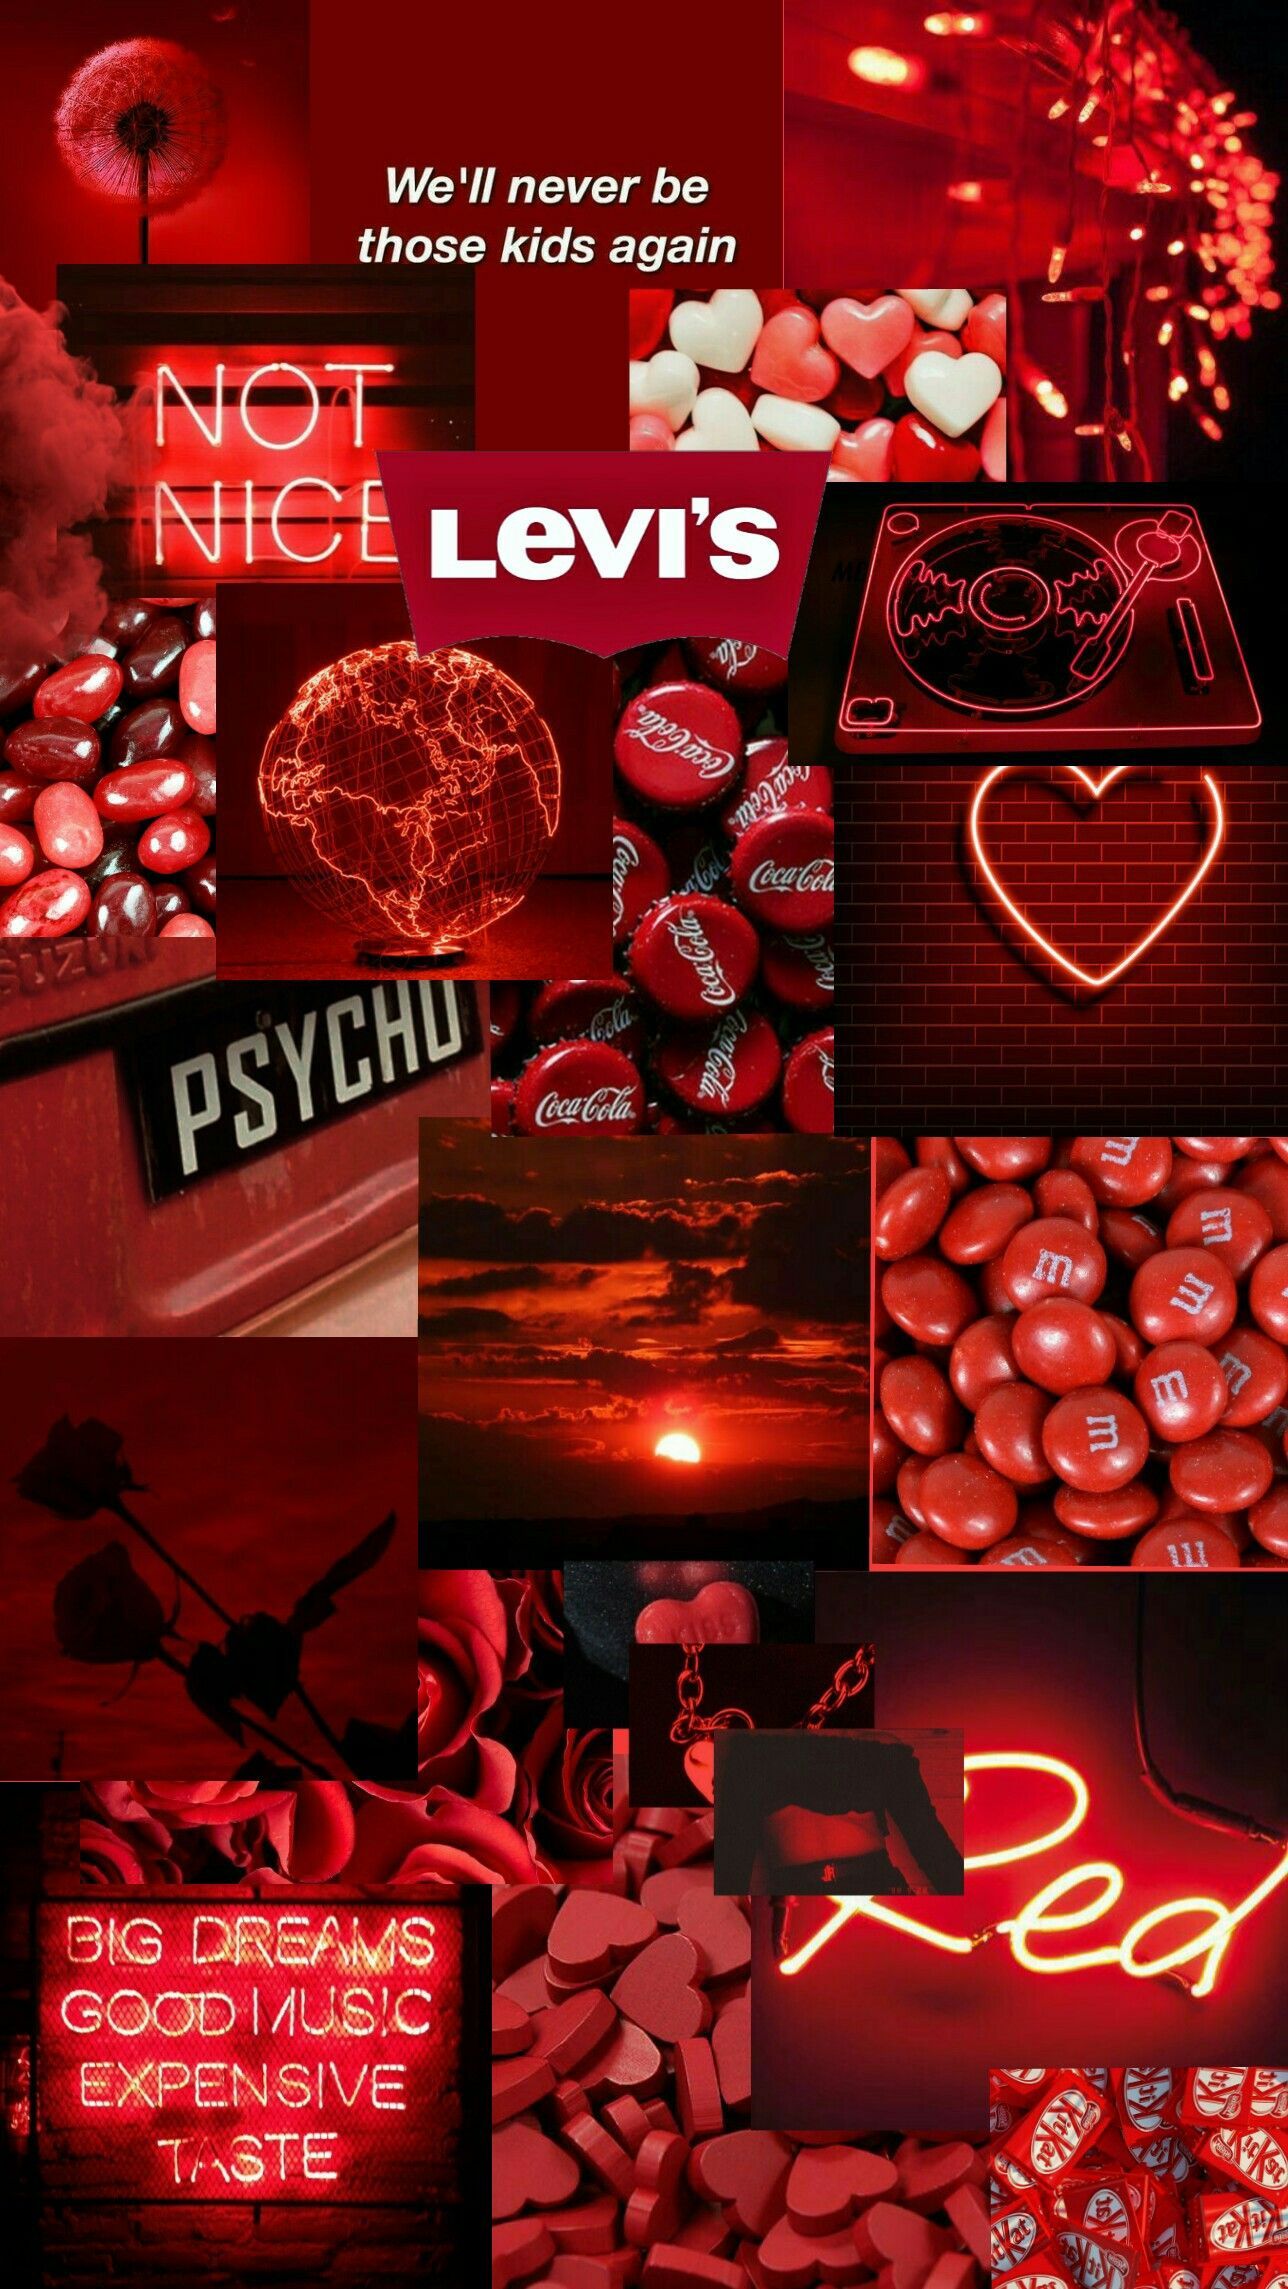 A collage of red items with the words levis on them - Red, dark red